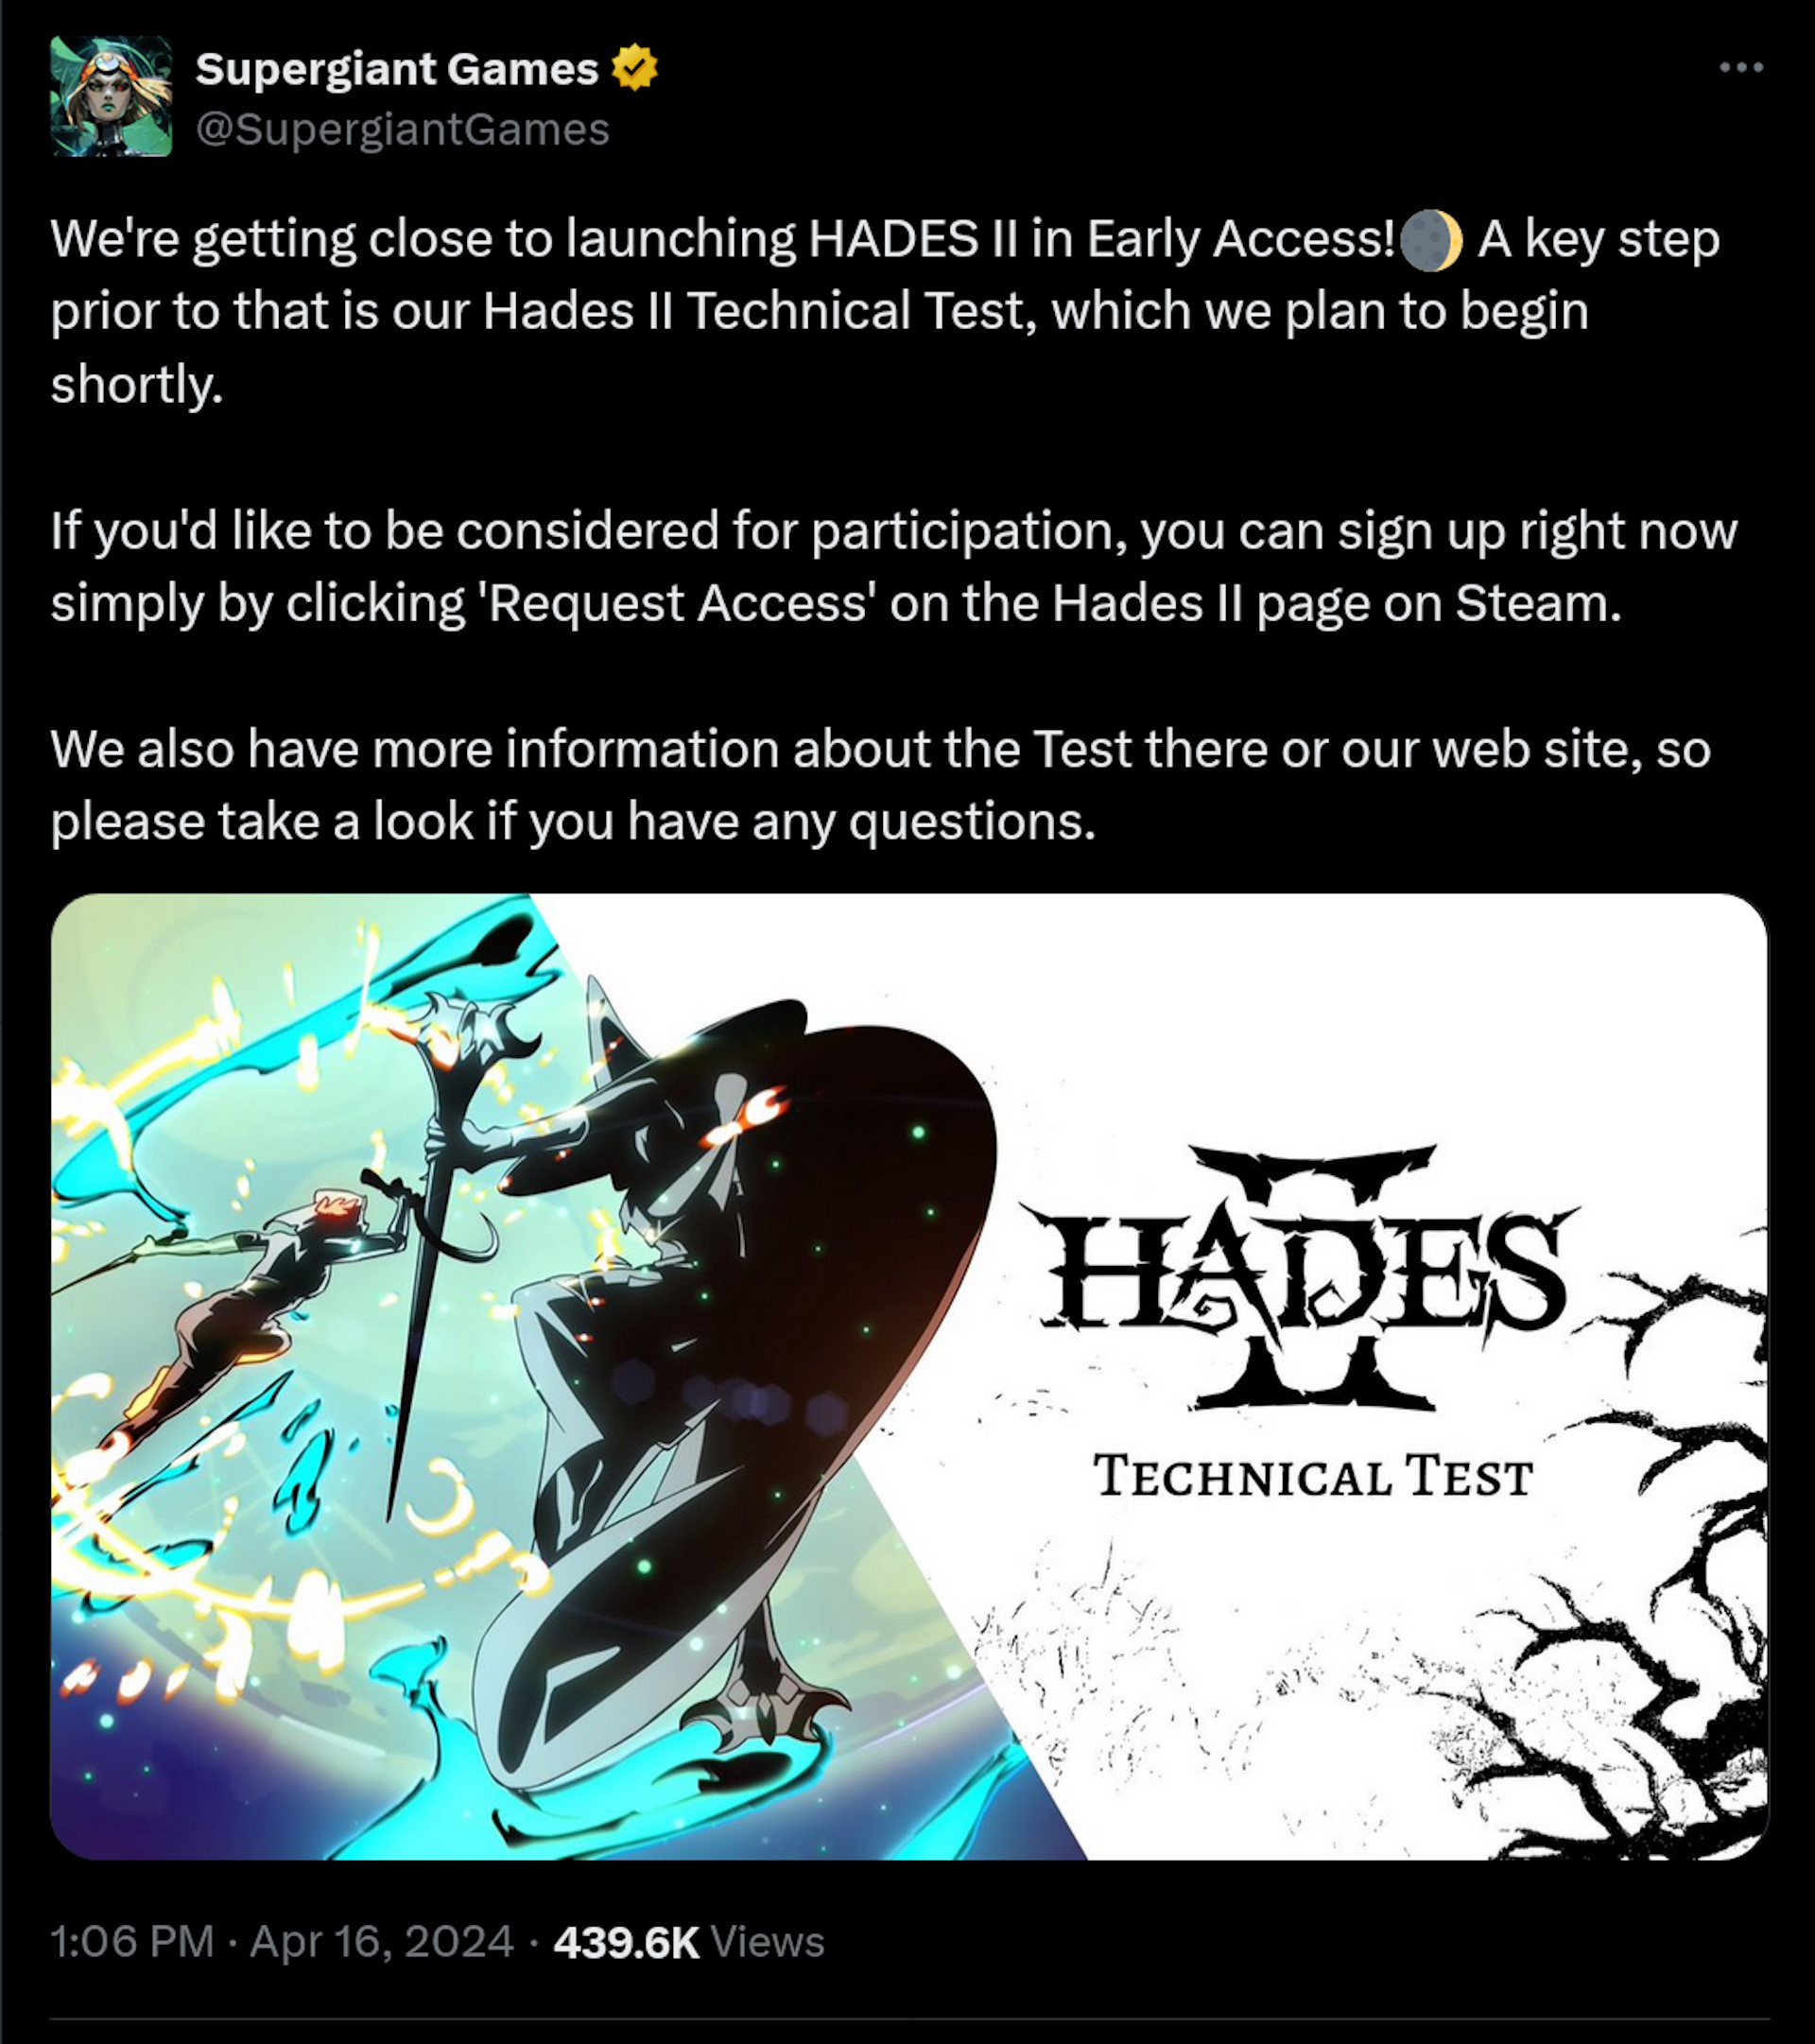 We're getting close to launching HADES II in Early Access!???? A key step prior to that is our Hades II Technical Test, which we plan to begin shortly.  If you'd like to be considered for participation, you can sign up right now simply by clicking 'Request Access' on the Hades II page on Steam.  We also have more information about the Test there or our web site, so please take a look if you have any questions.